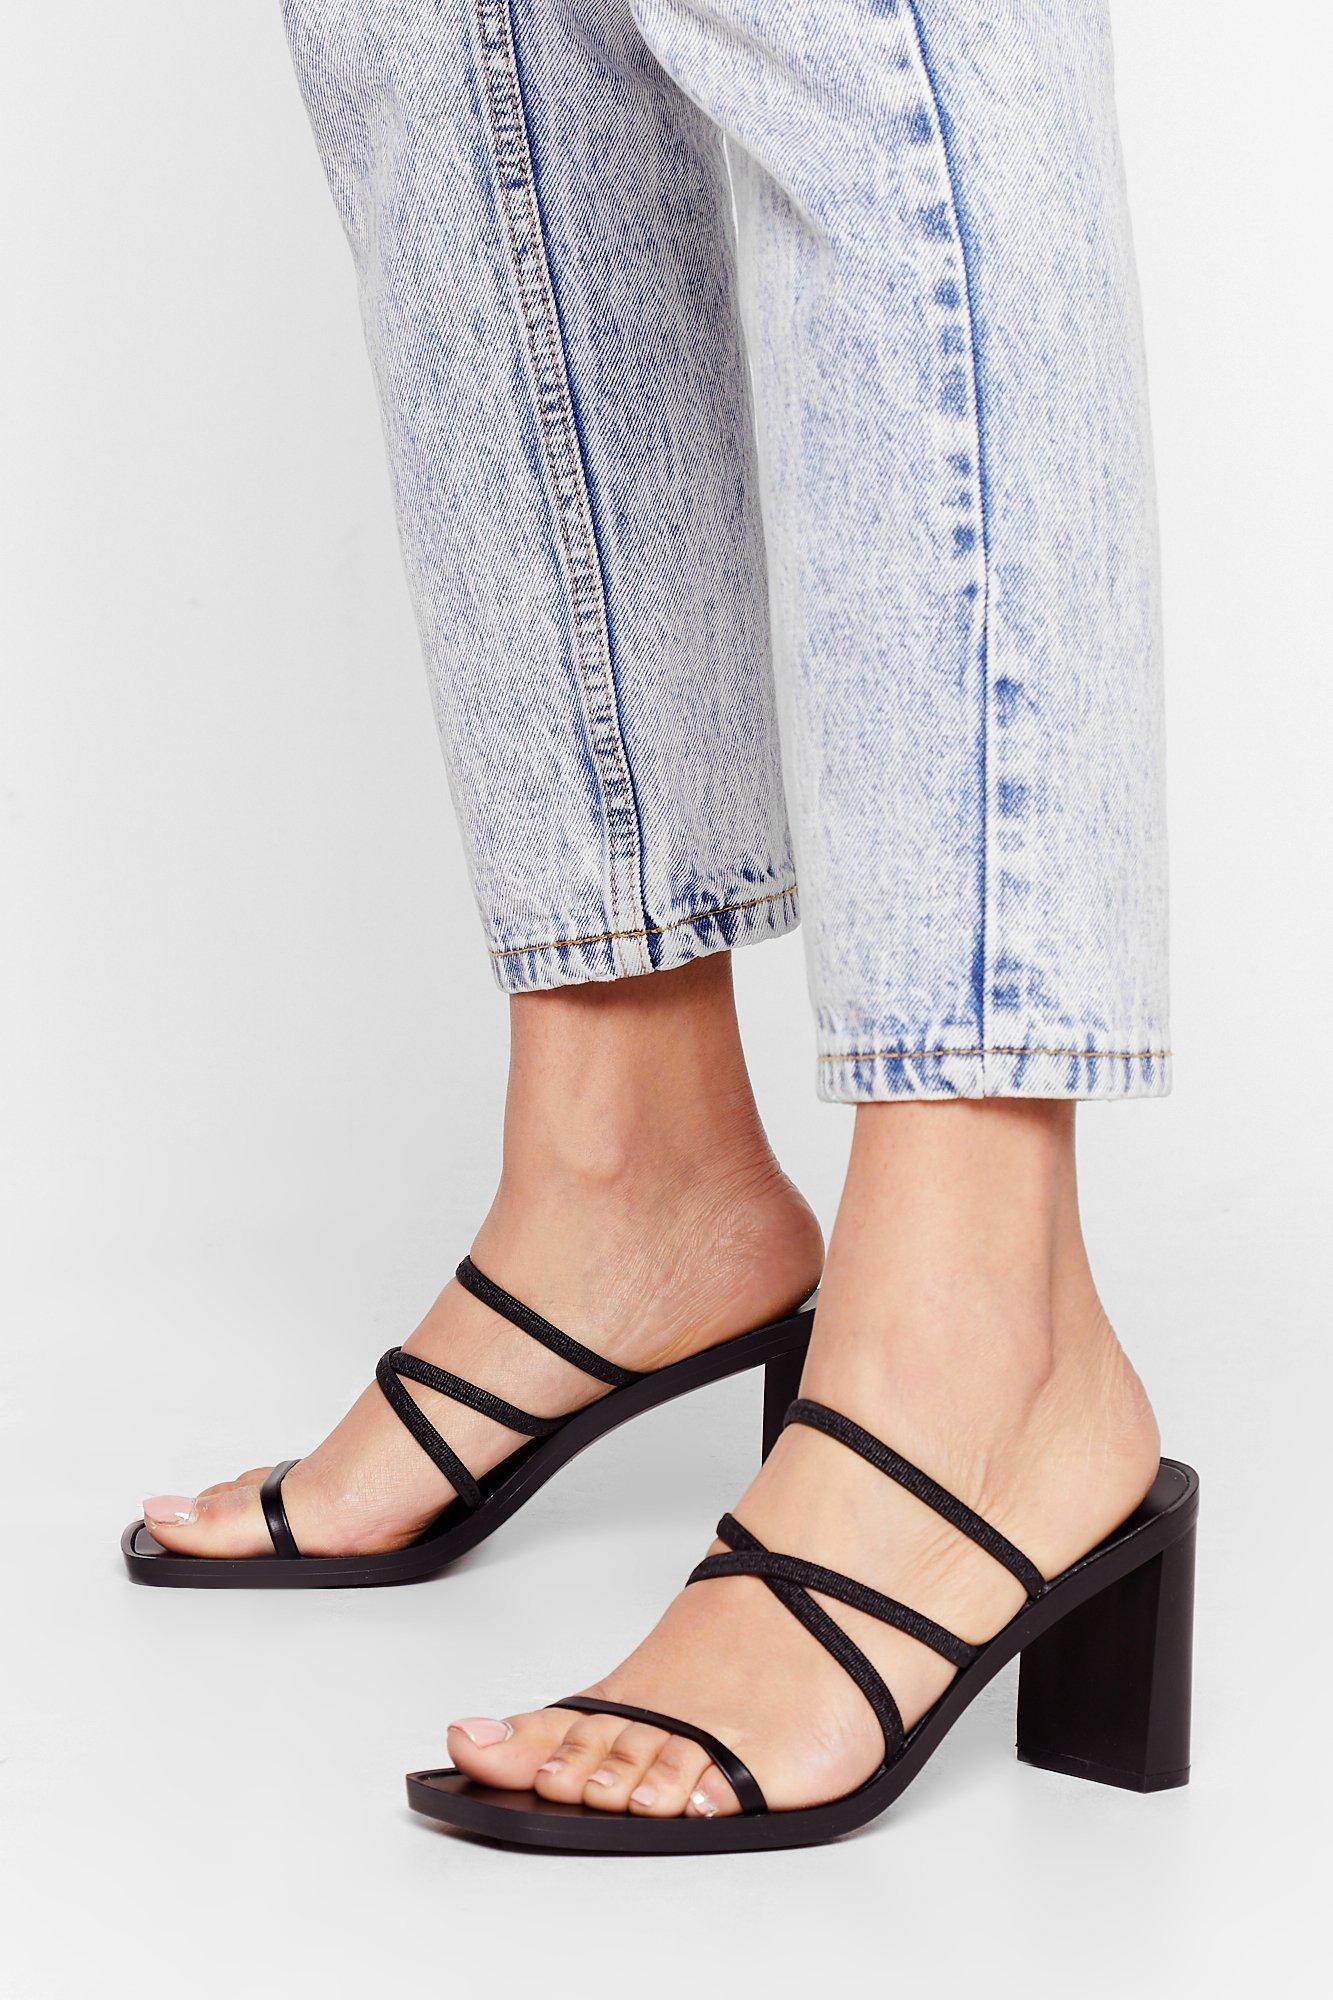 Actin' Cagey Strappy Heeled Mules 